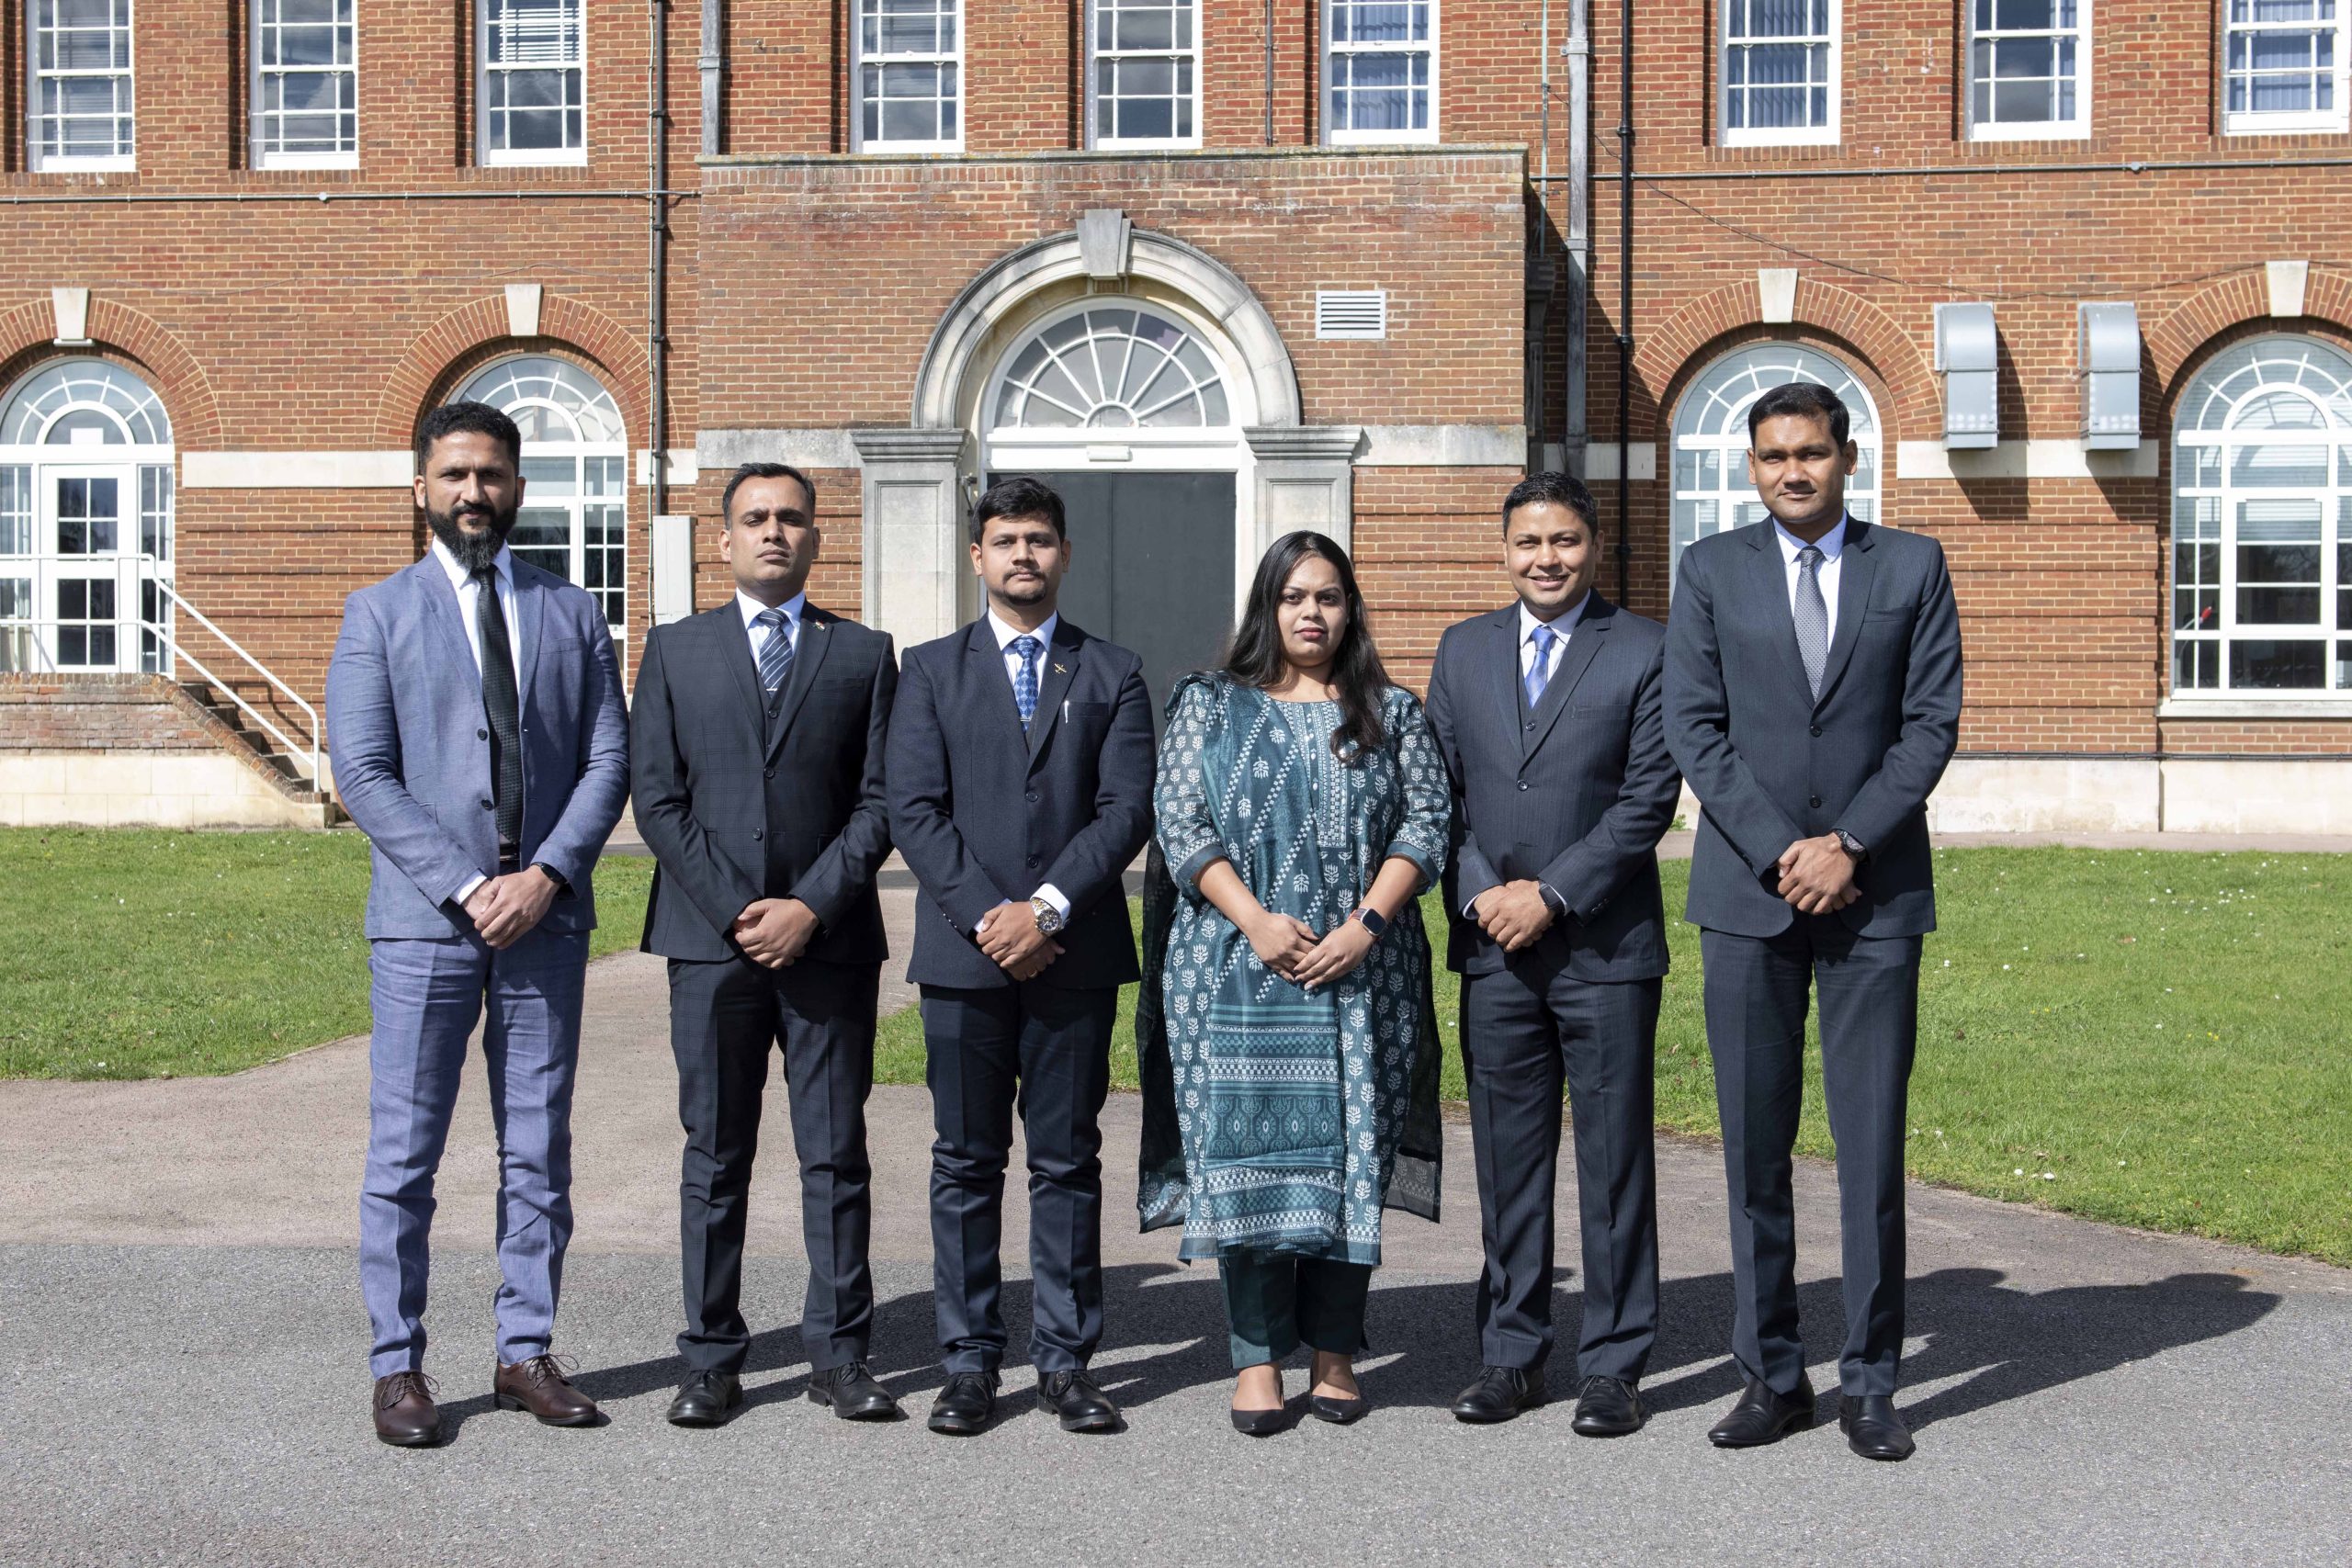 Chevening India Cyber Security Fellowship